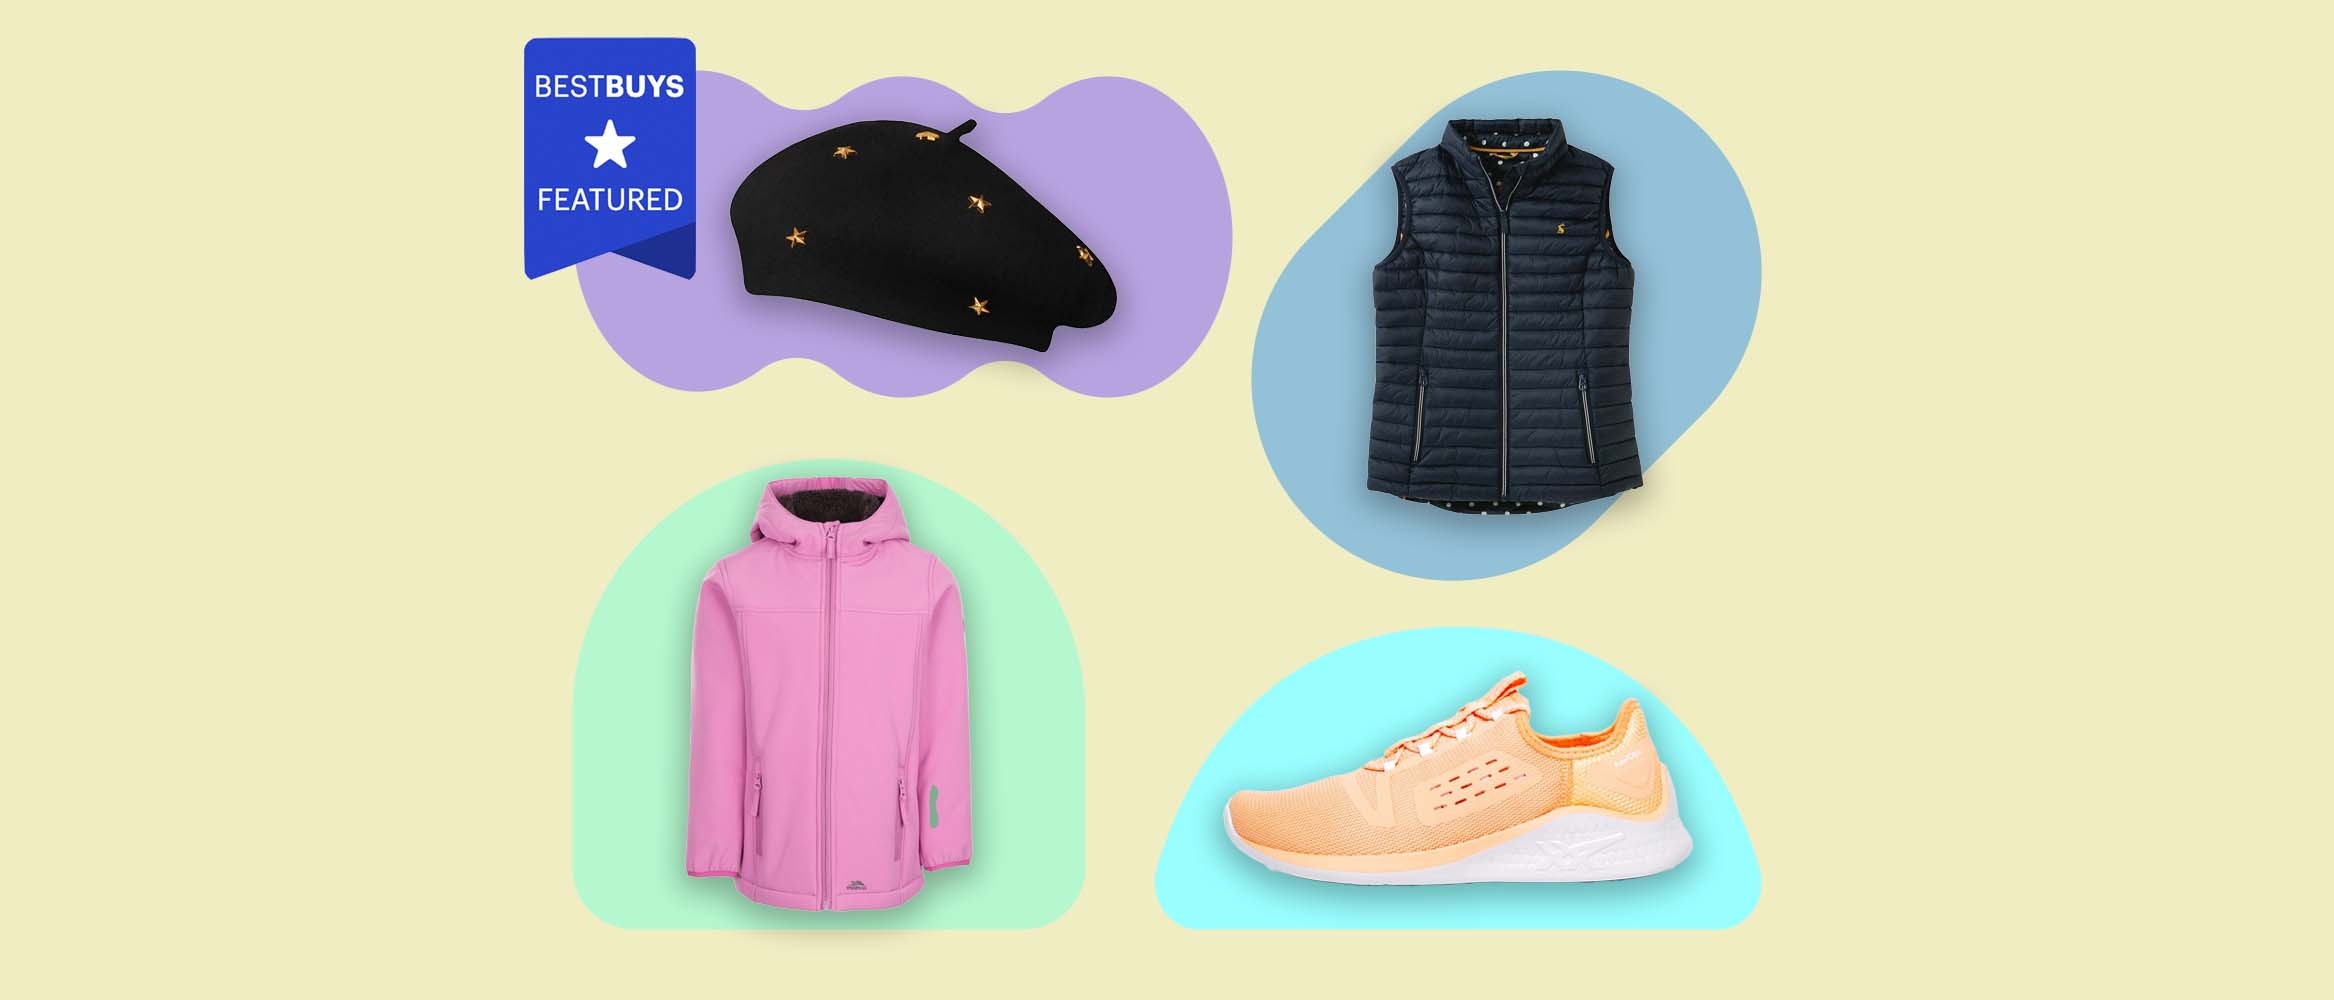 Shop eBay's clothing brand outlet, perfect for the whole family